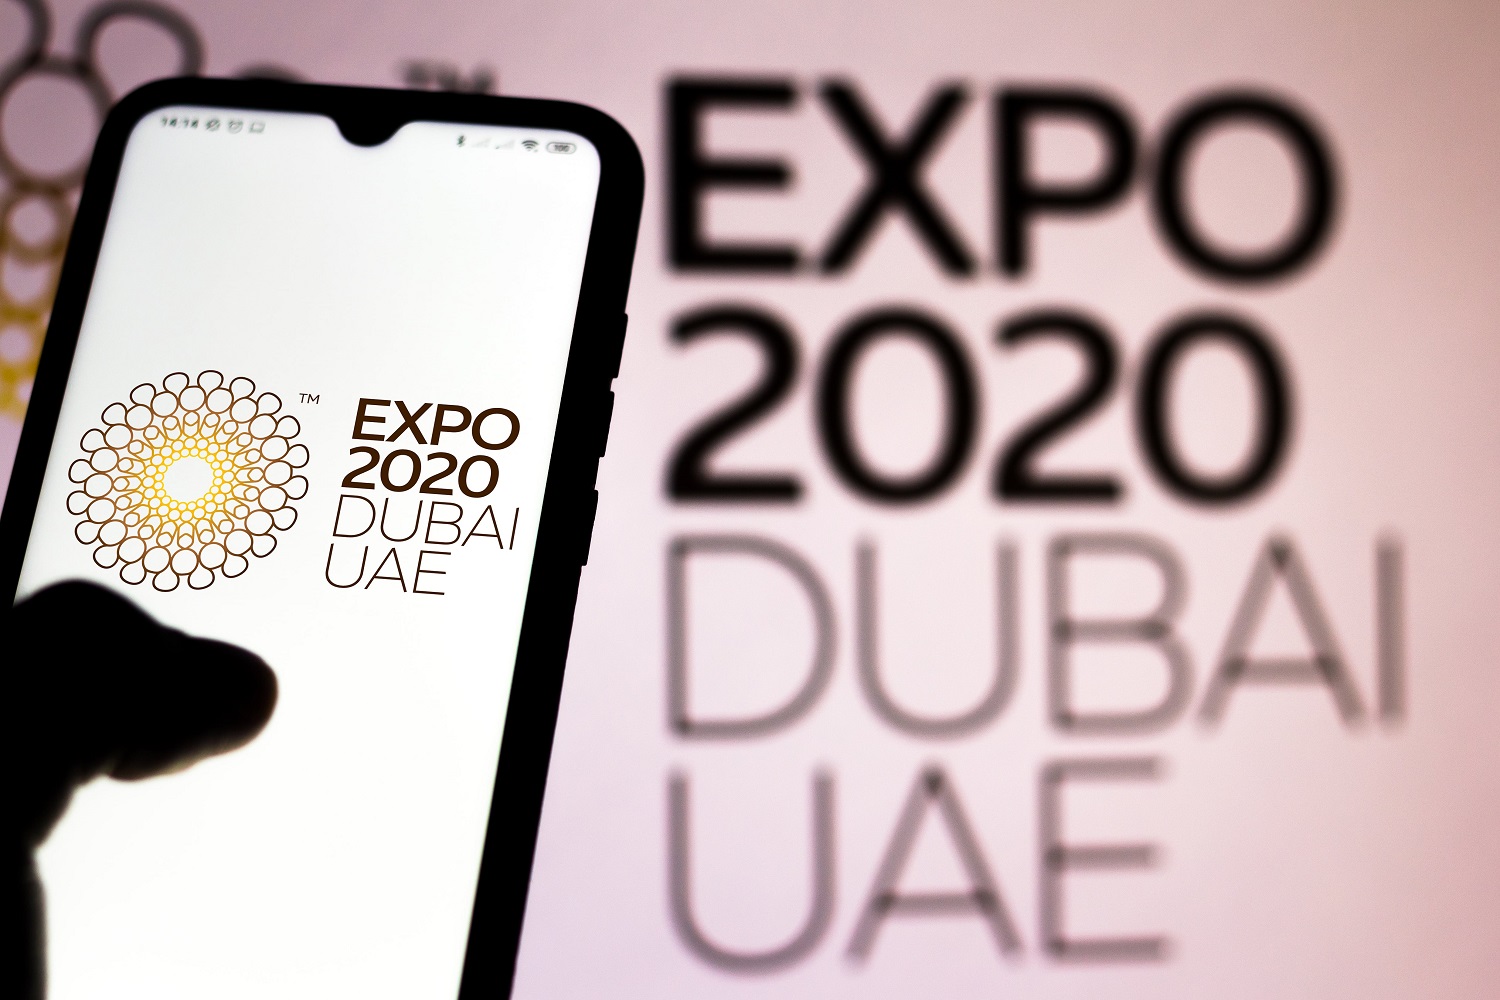 How will the Expo 2020 impact Dubai’s IT sector?